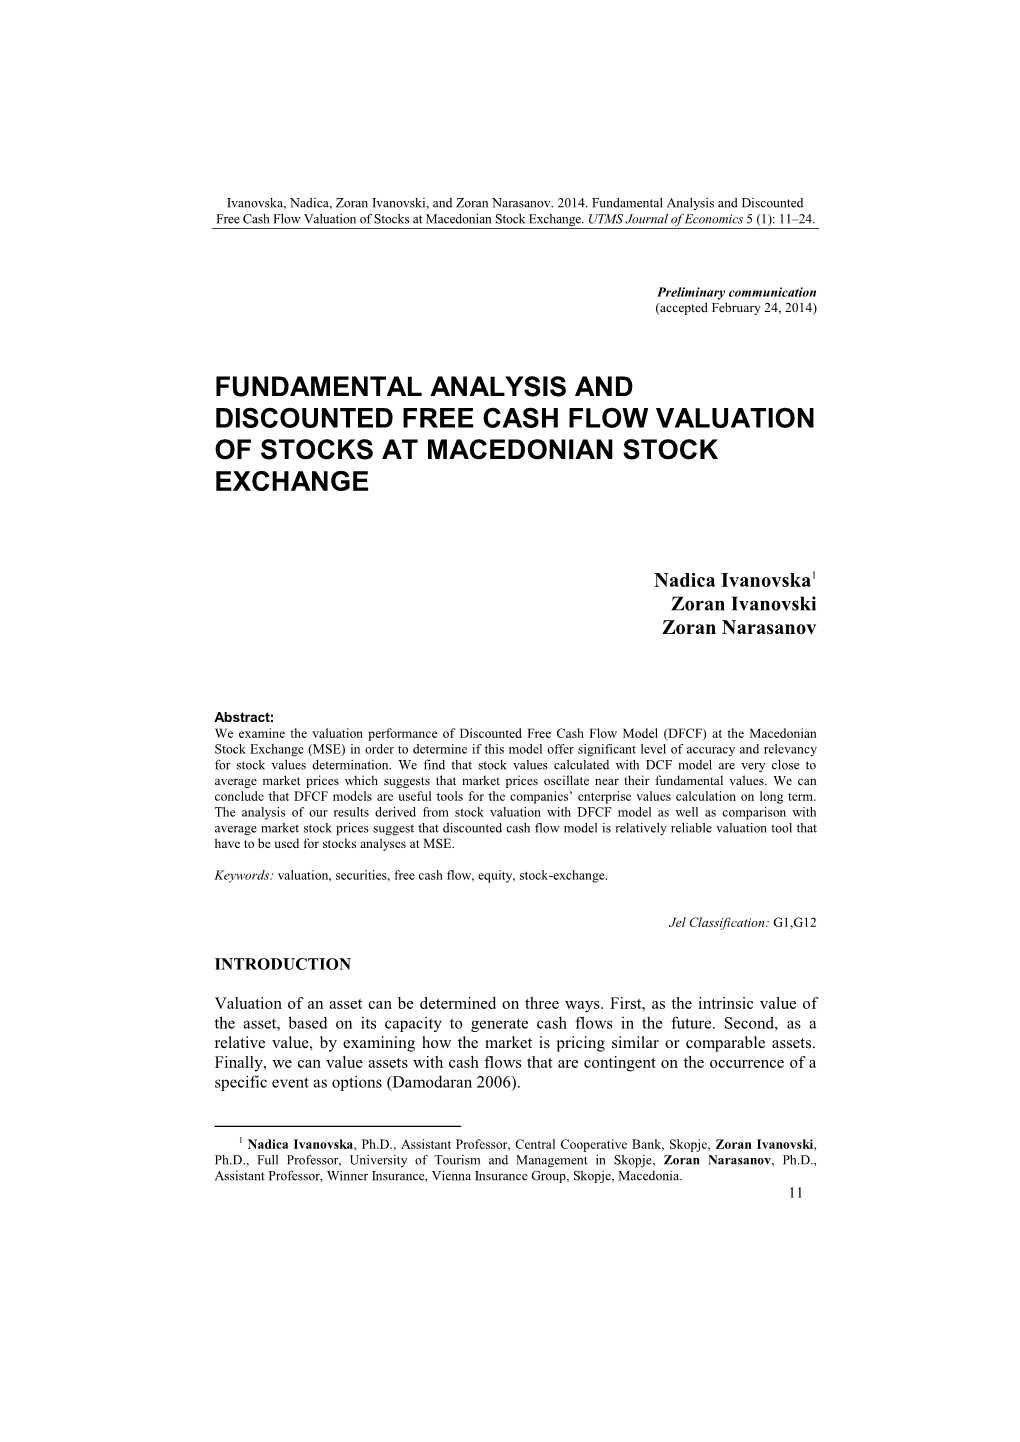 Fundamental Analysis and Discounted Free Cash Flow Valuation of Stocks at Macedonian Stock Exchange